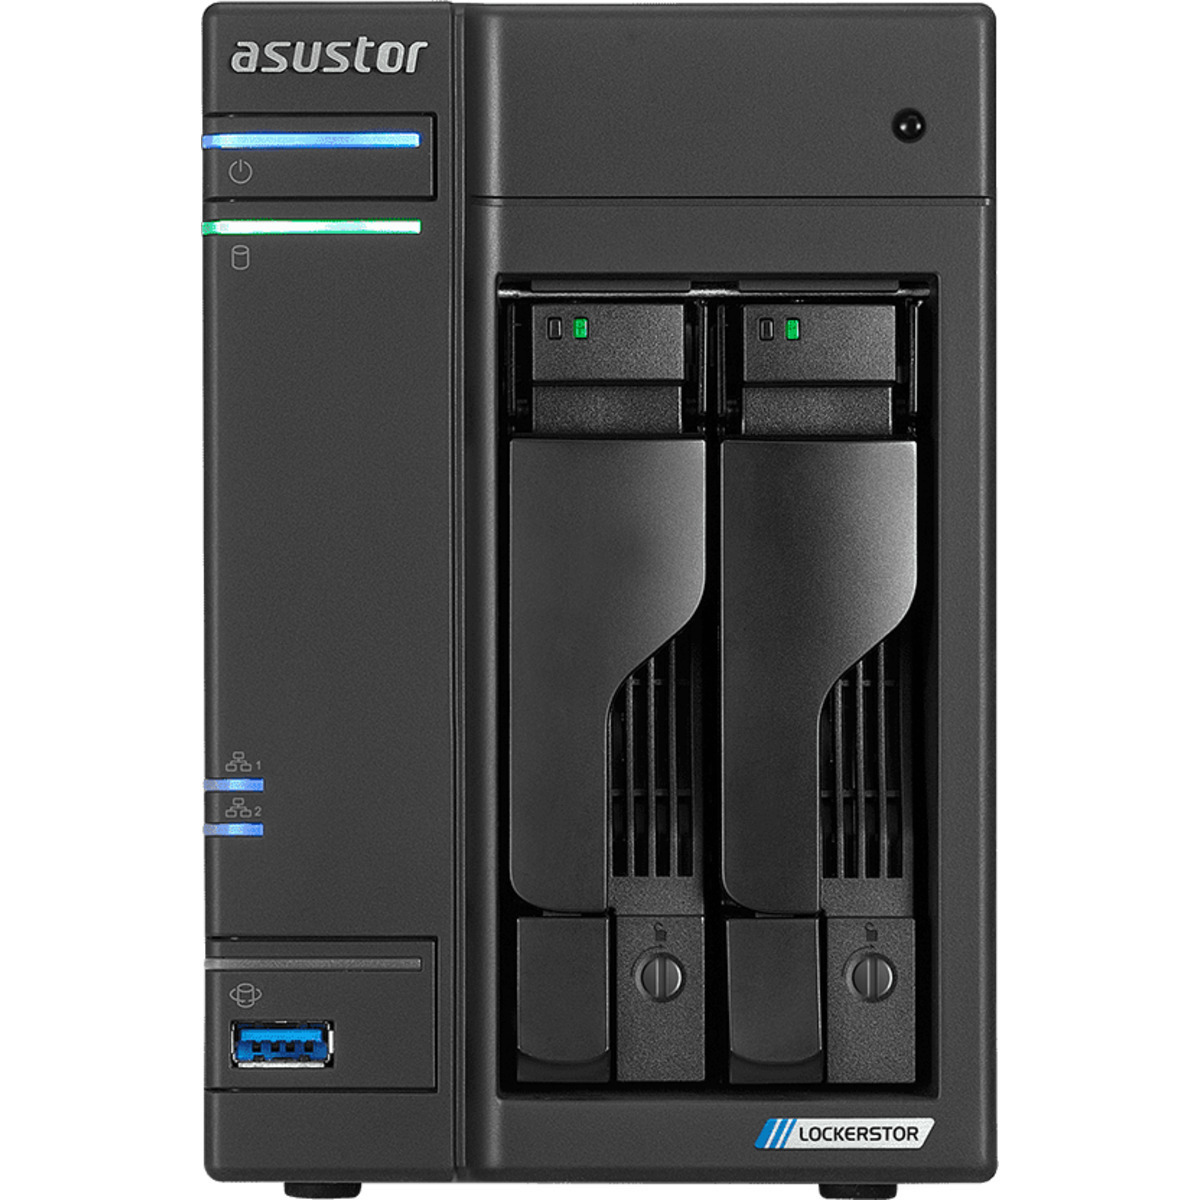 buy $1494 ASUSTOR AS6602T Lockerstor 2 28tb Desktop NAS - Network Attached Storage Device 2x14000gb Western Digital Red Plus WD140EFGX 3.5 7200rpm SATA 6Gb/s HDD NAS Class Drives Installed - Burn-In Tested - FREE RAM UPGRADE - nas headquarters buy network attached storage server device das new raid-5 free shipping usa christmas new year holiday sale AS6602T Lockerstor 2